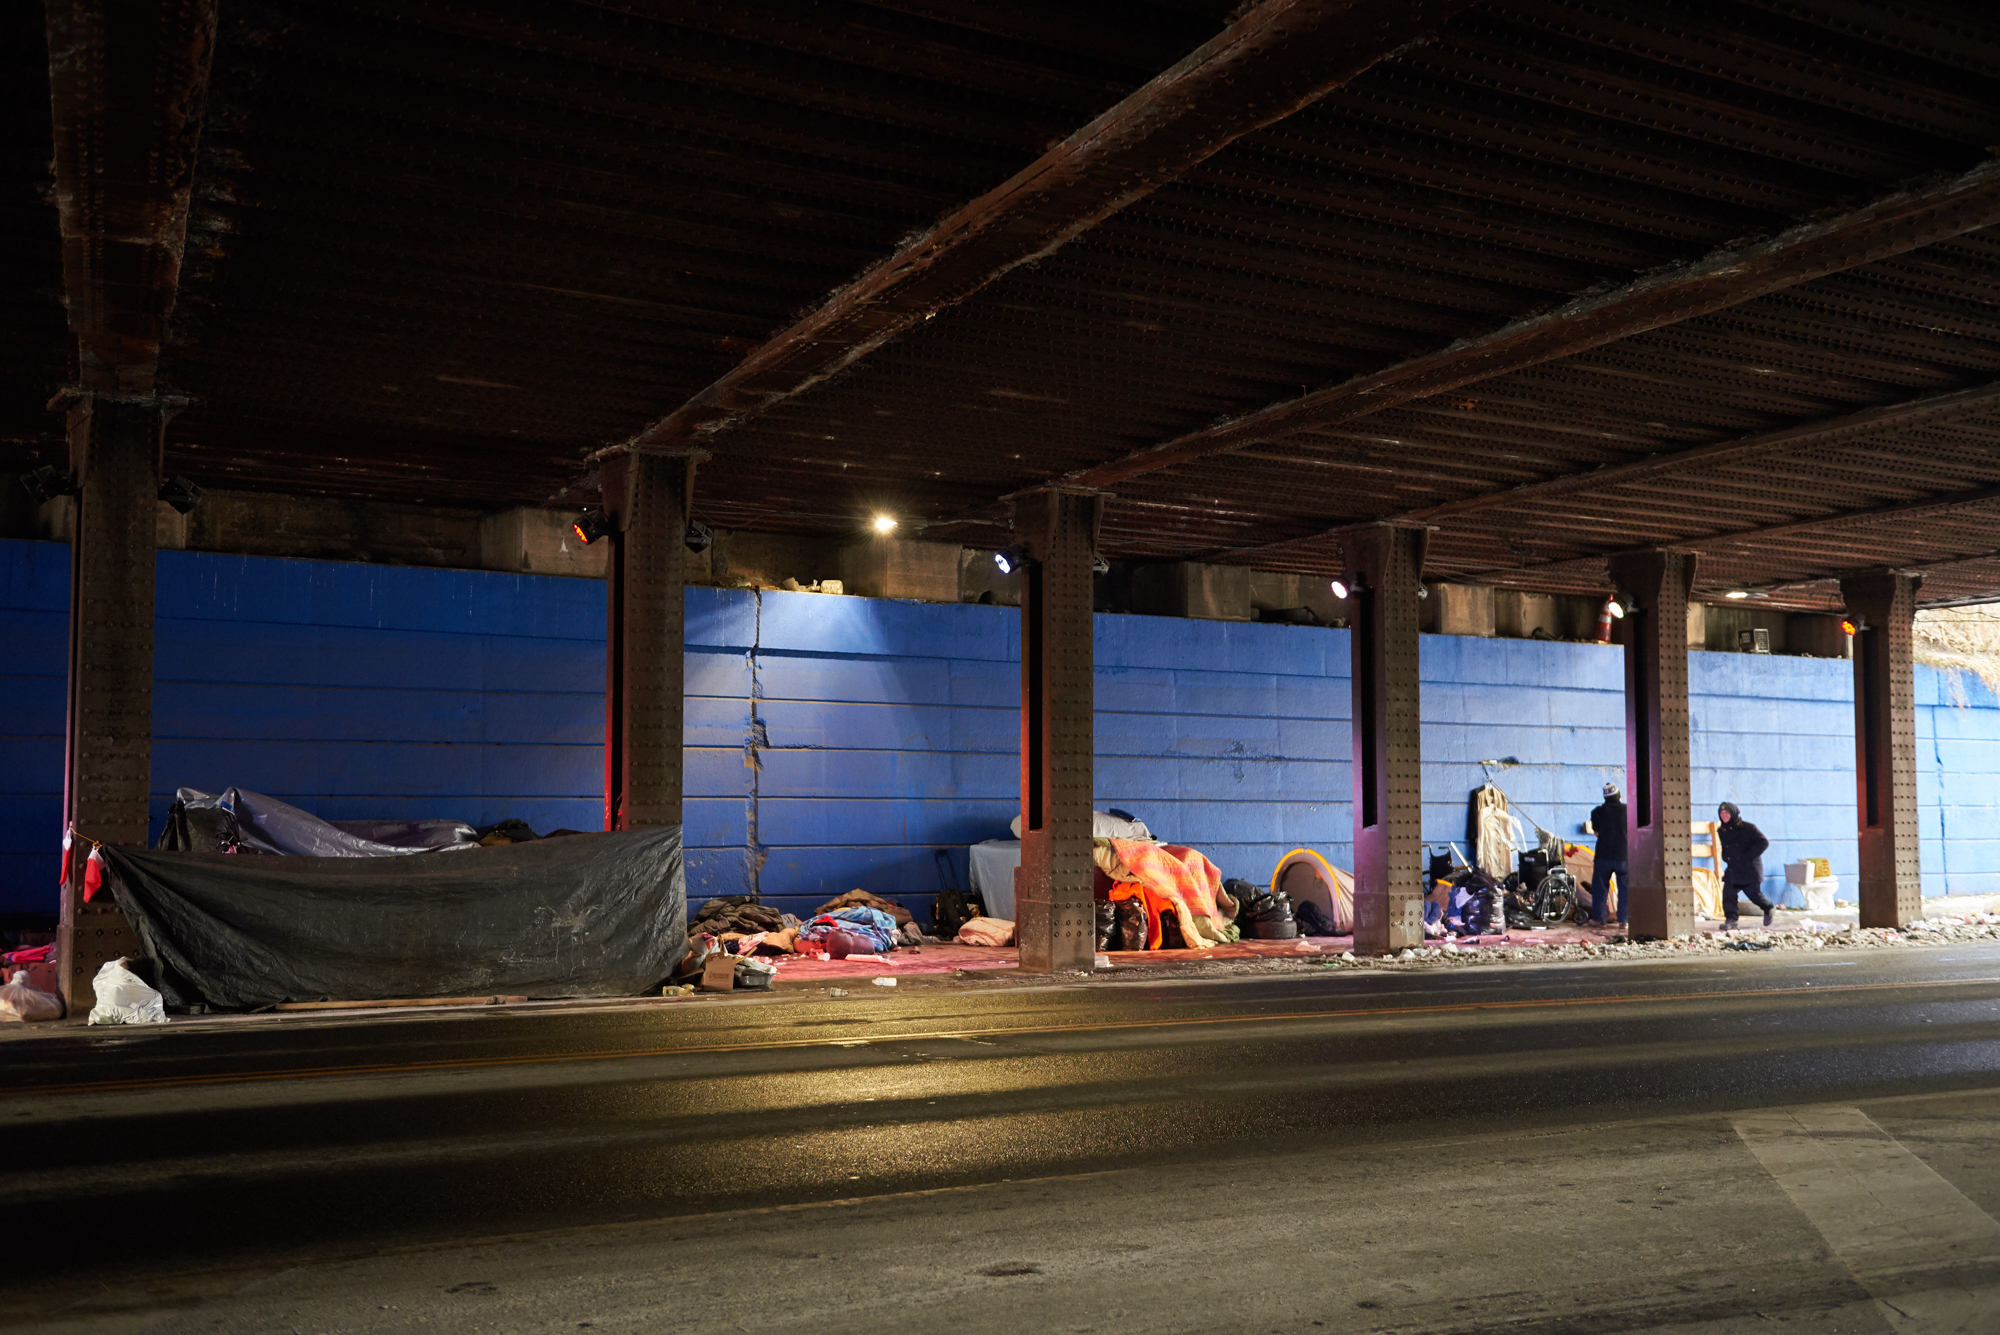 The mix of people in rows of tents under a bridge in Philadelphia's Kensington neighborhood includes homeless adults and some visitors from the suburbs who come here to inject opioids in secret. (Photo by Natalie Piserchio/WHYY)